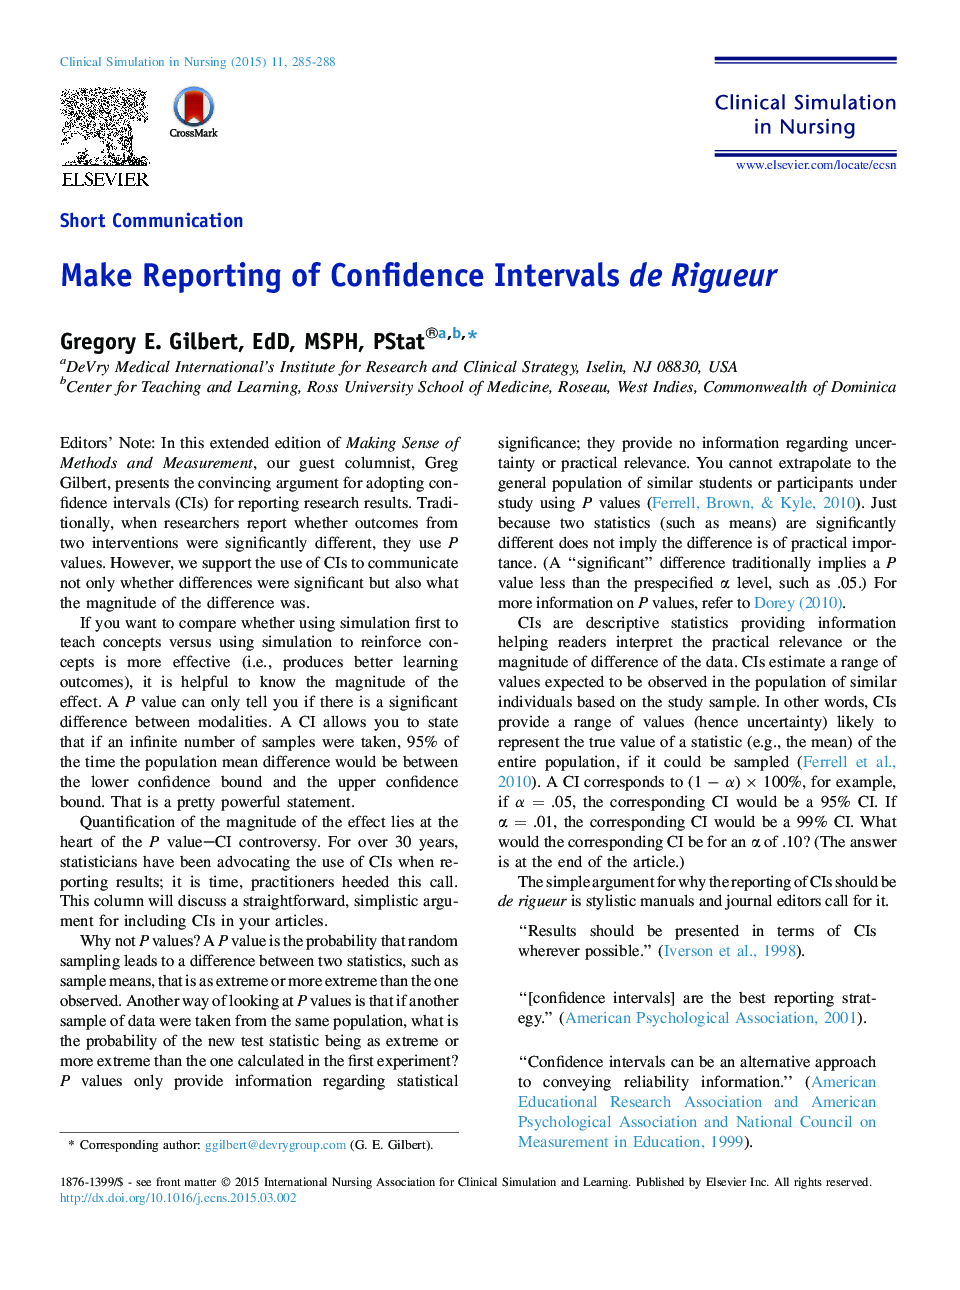 Make Reporting of Confidence Intervals de Rigueur